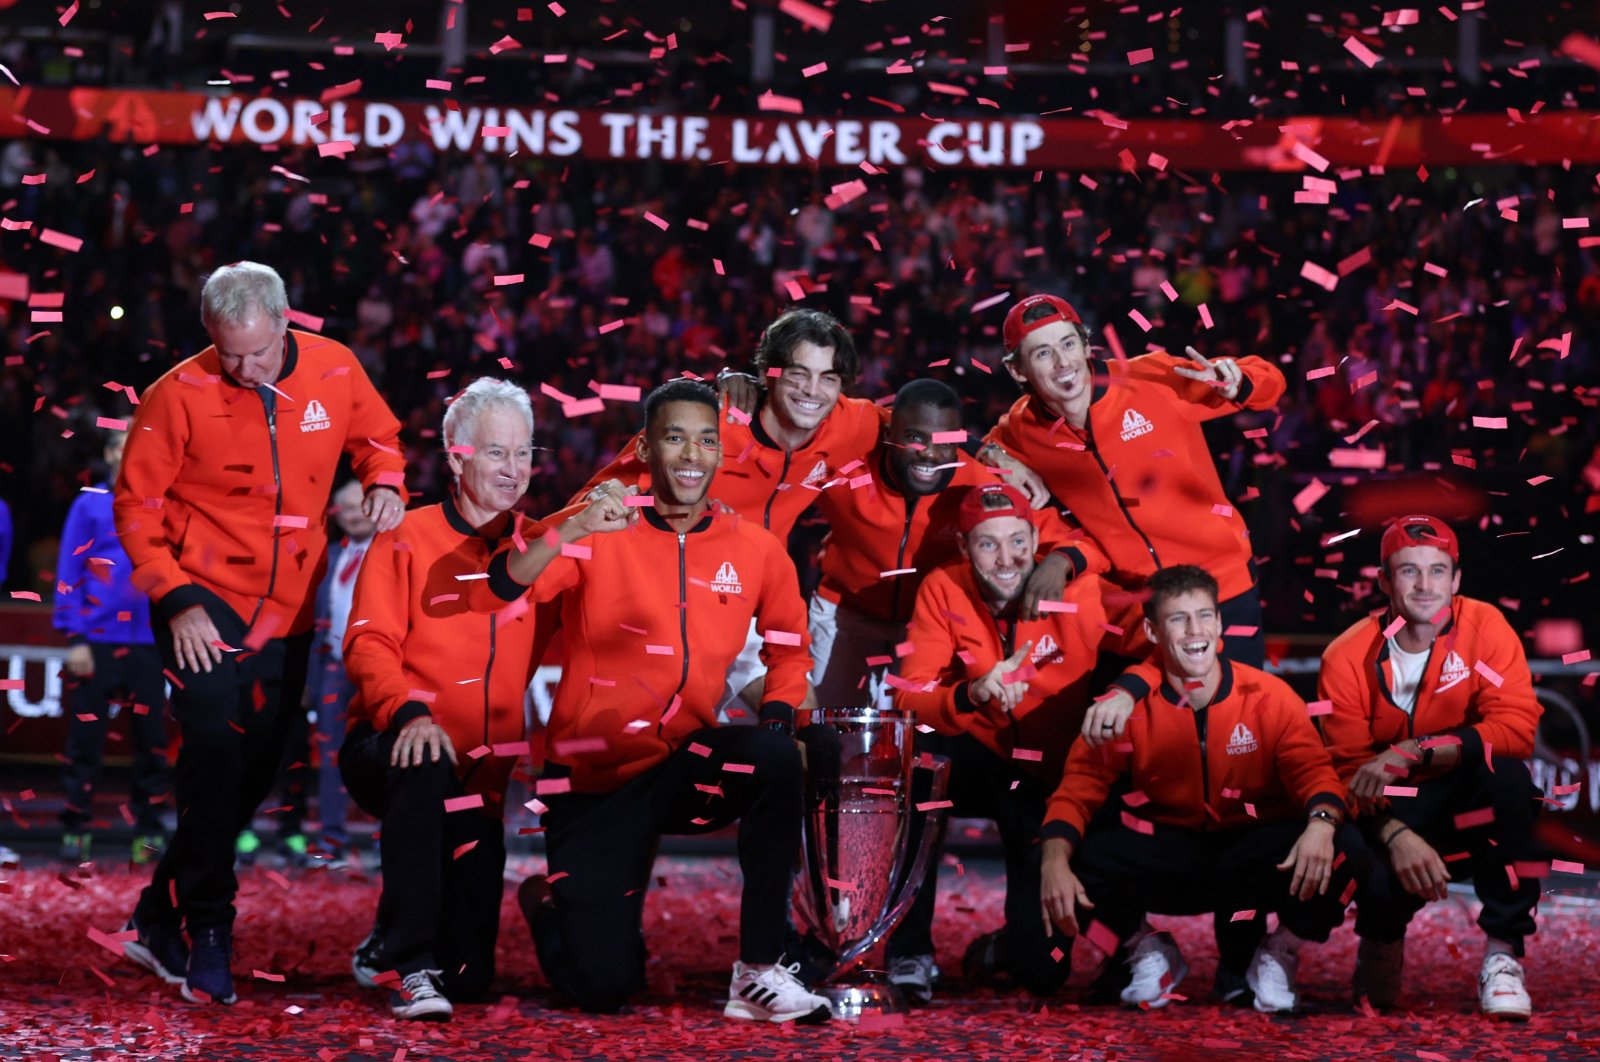 Team World poses with the trophy after victory over Team Europe in the 2022 Laver Cup, London, England, Sept. 25, 2022. (AFP Photo)